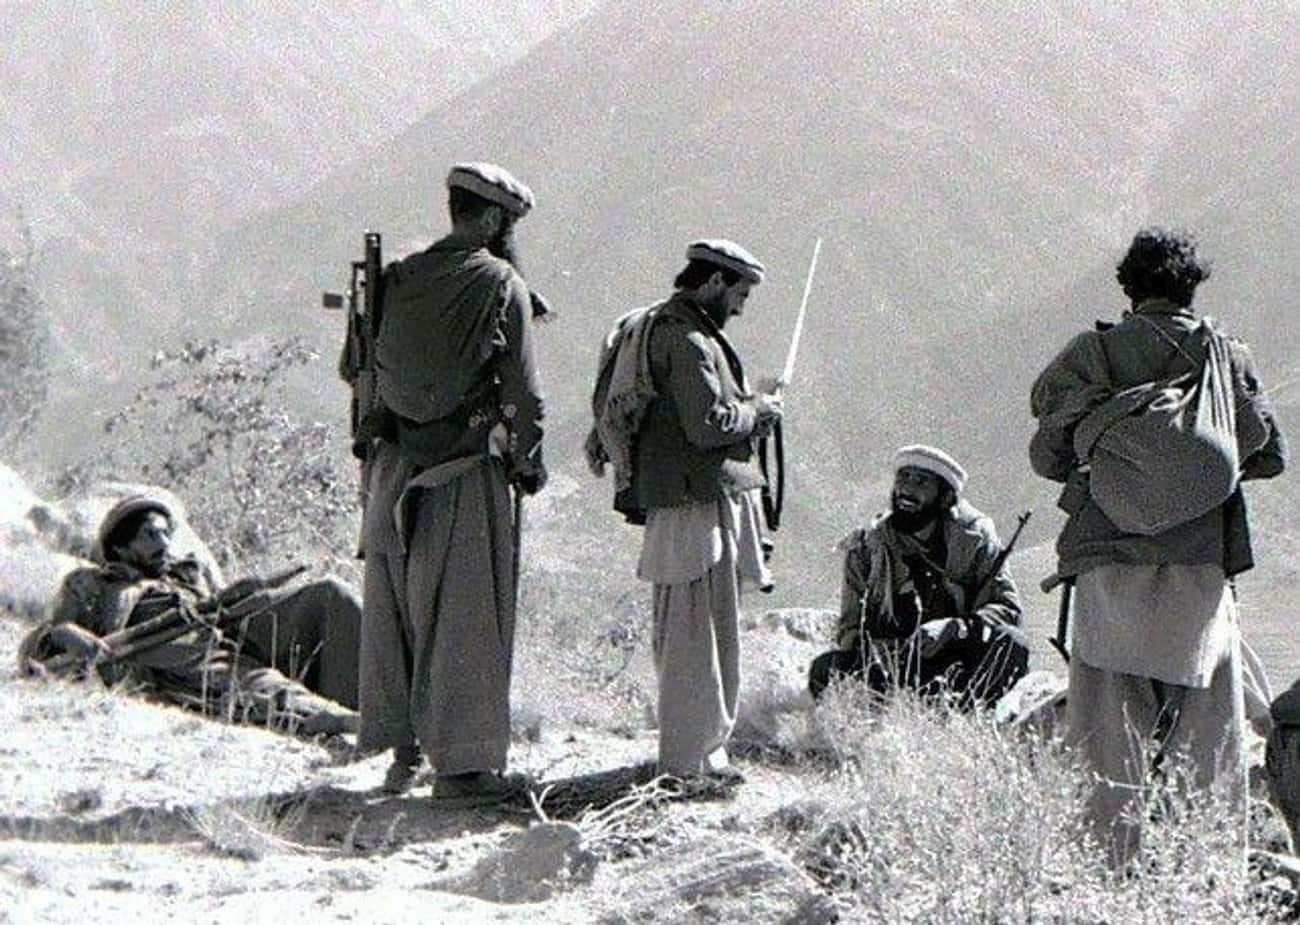 The USSR Invades Afghanistan